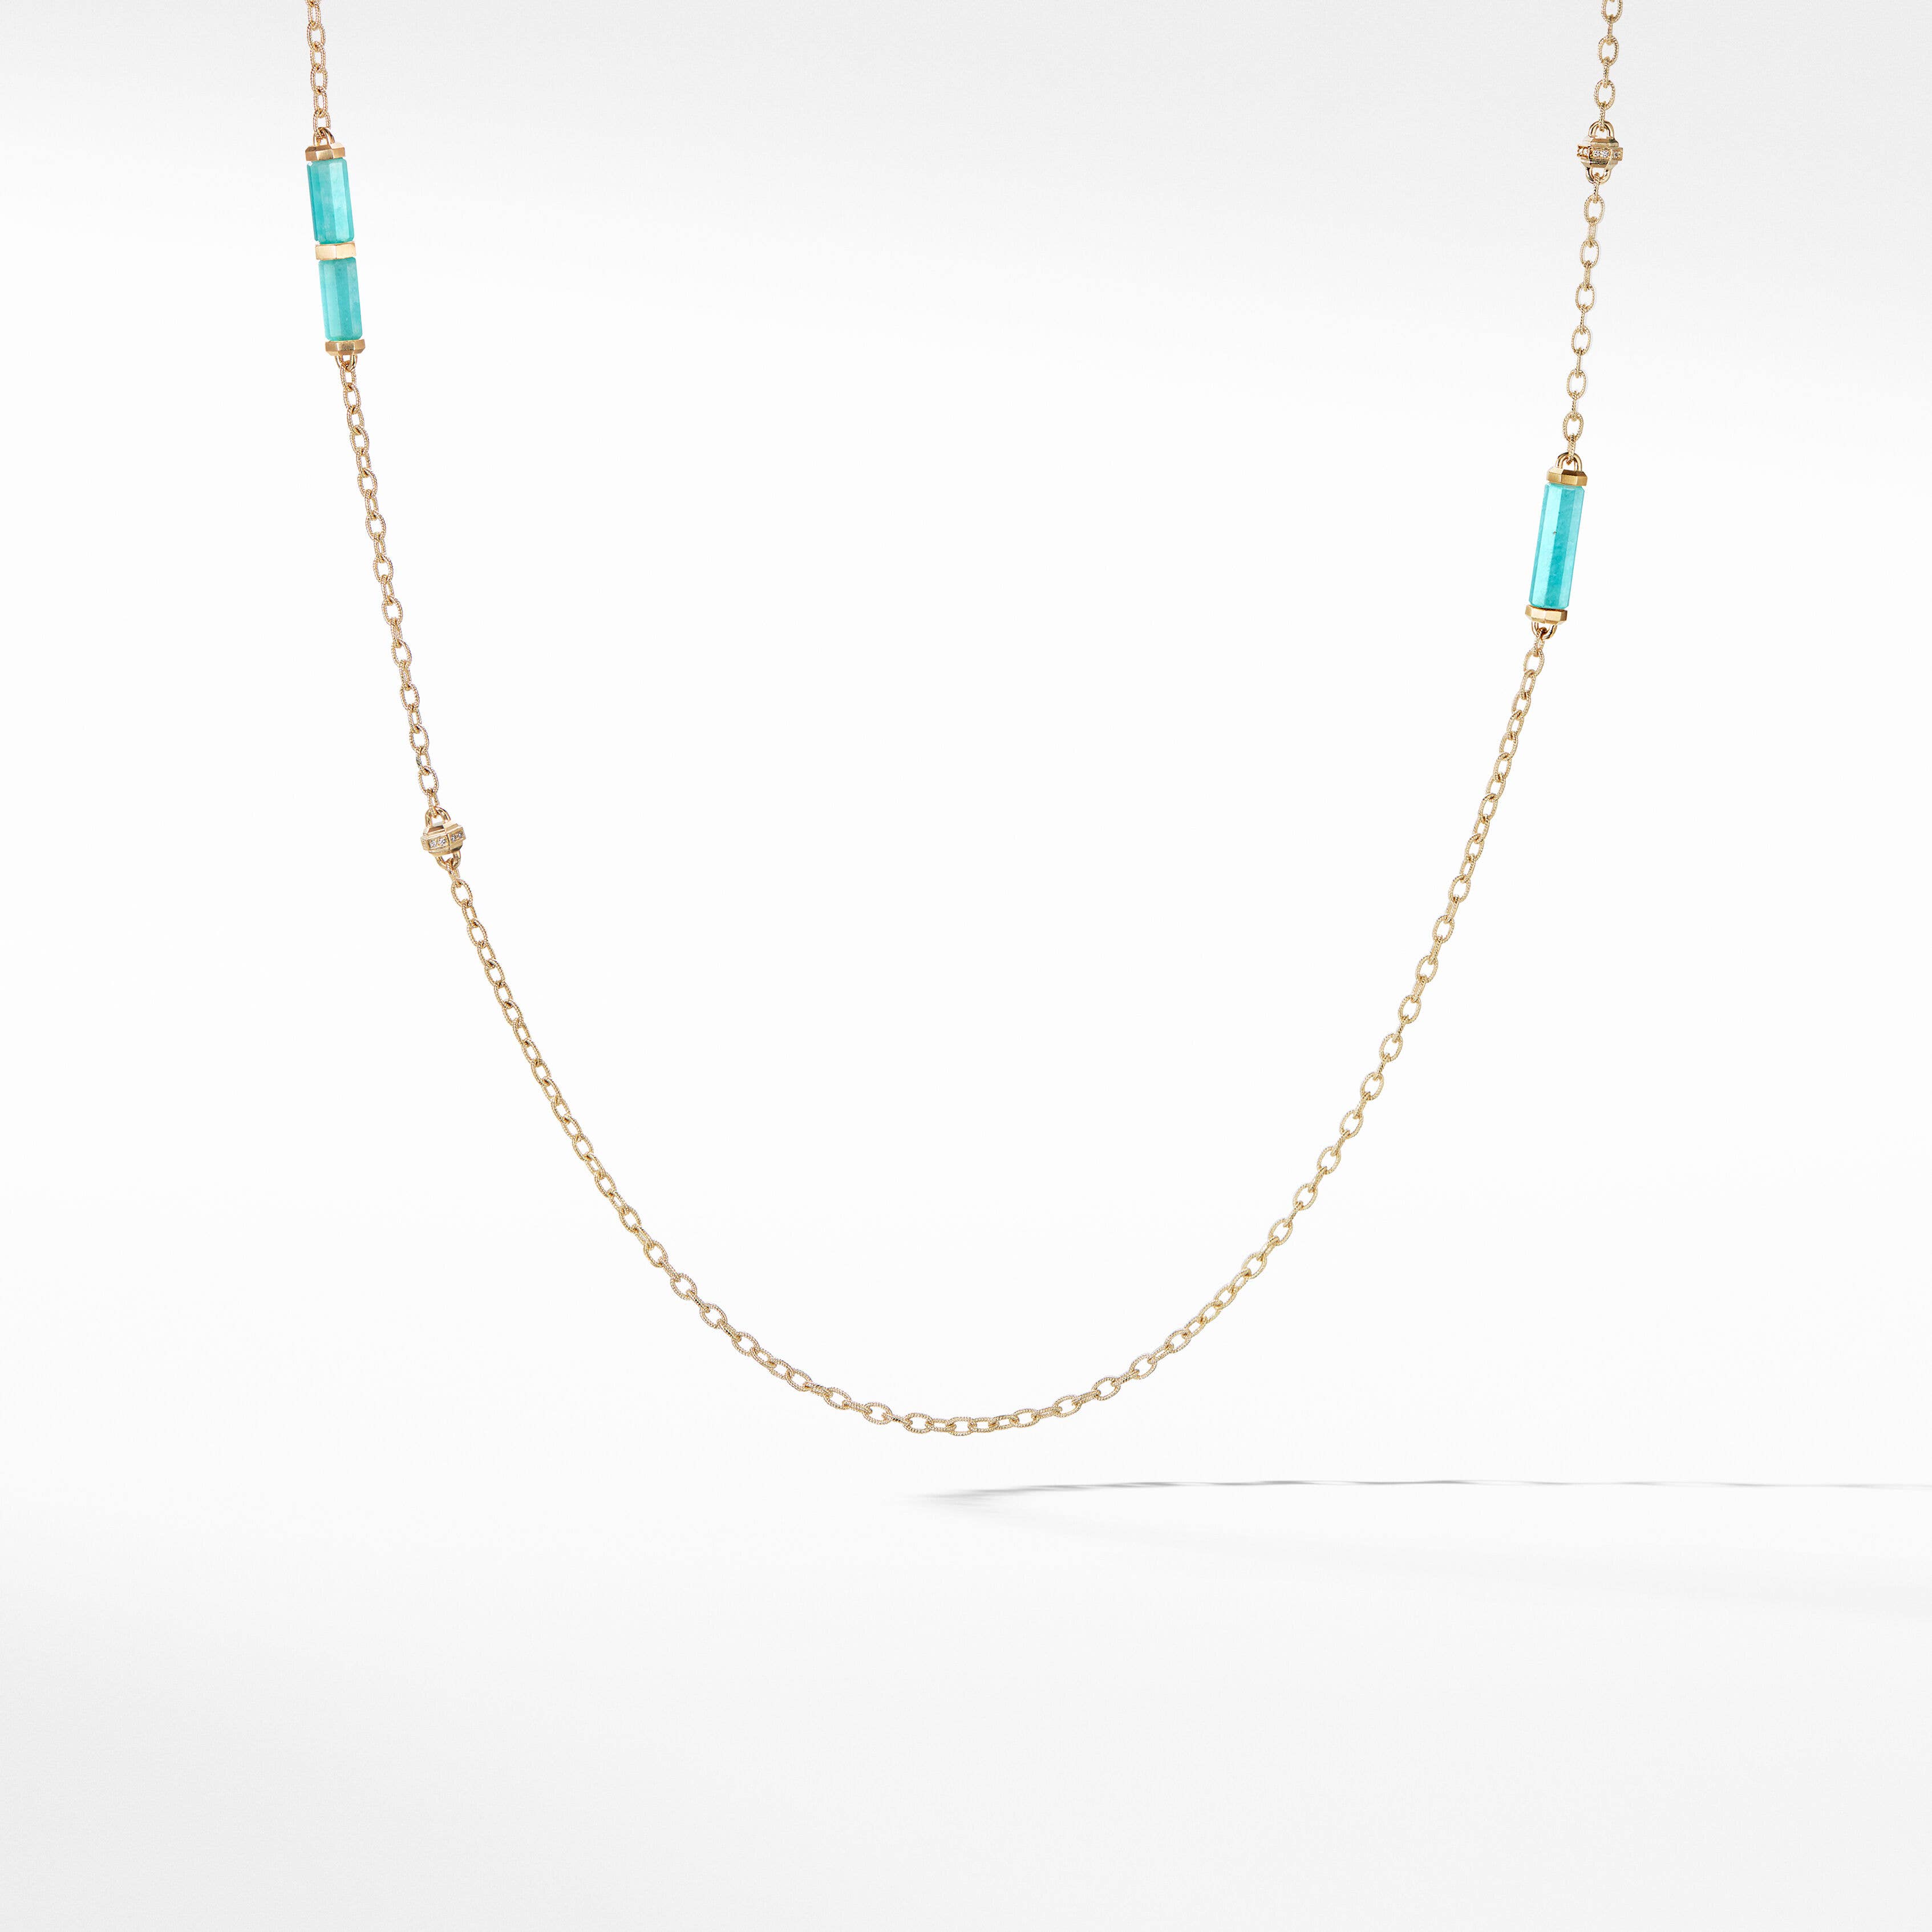 Lexington Barrel Station Necklace in 18K Yellow Gold with Amazonite and Pavé Diamonds